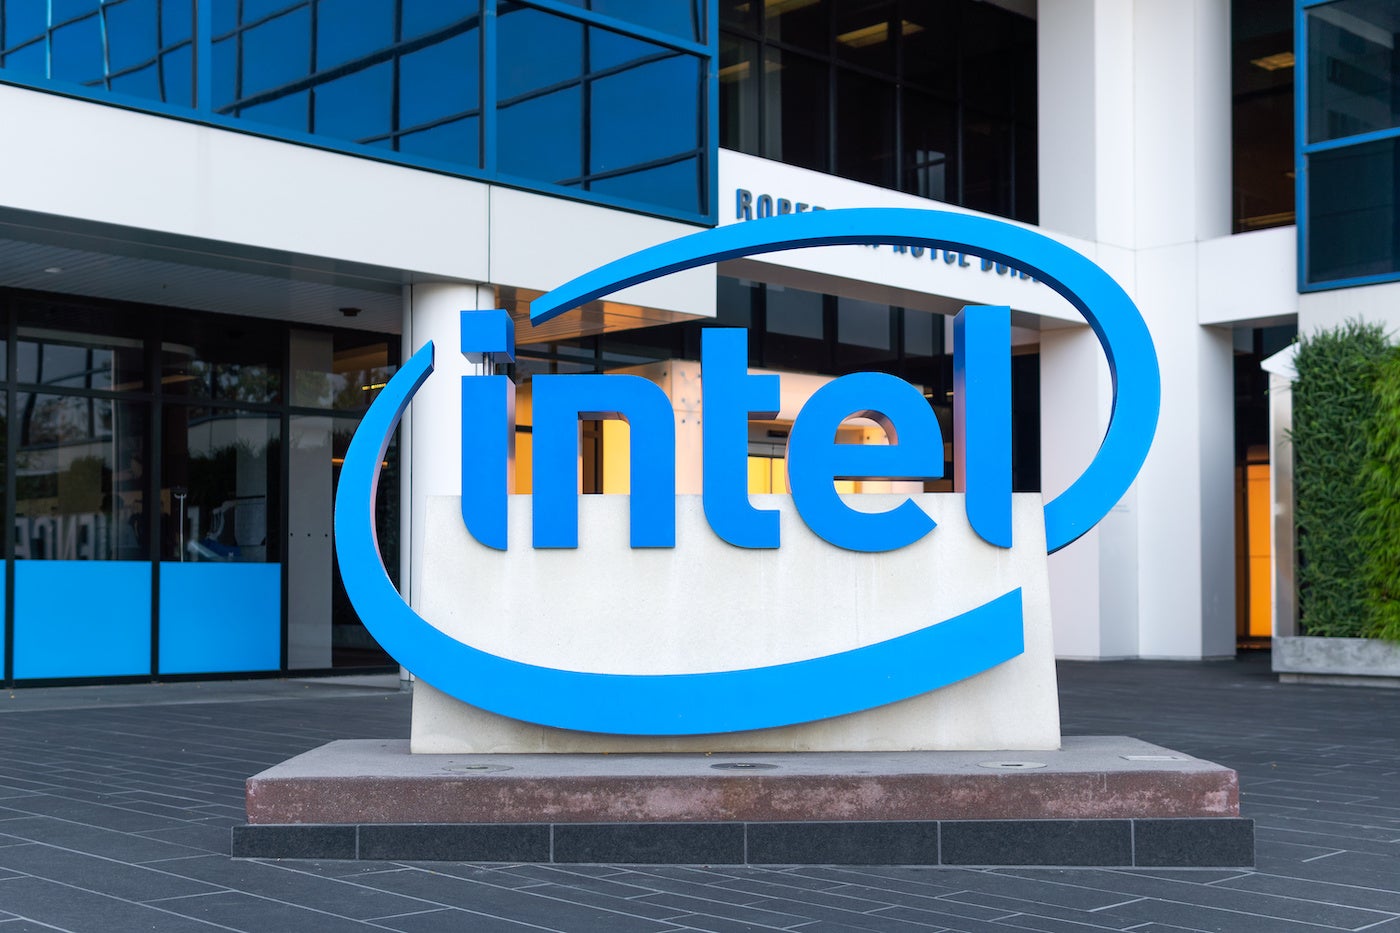 The Intel sign in front of their headquarters.